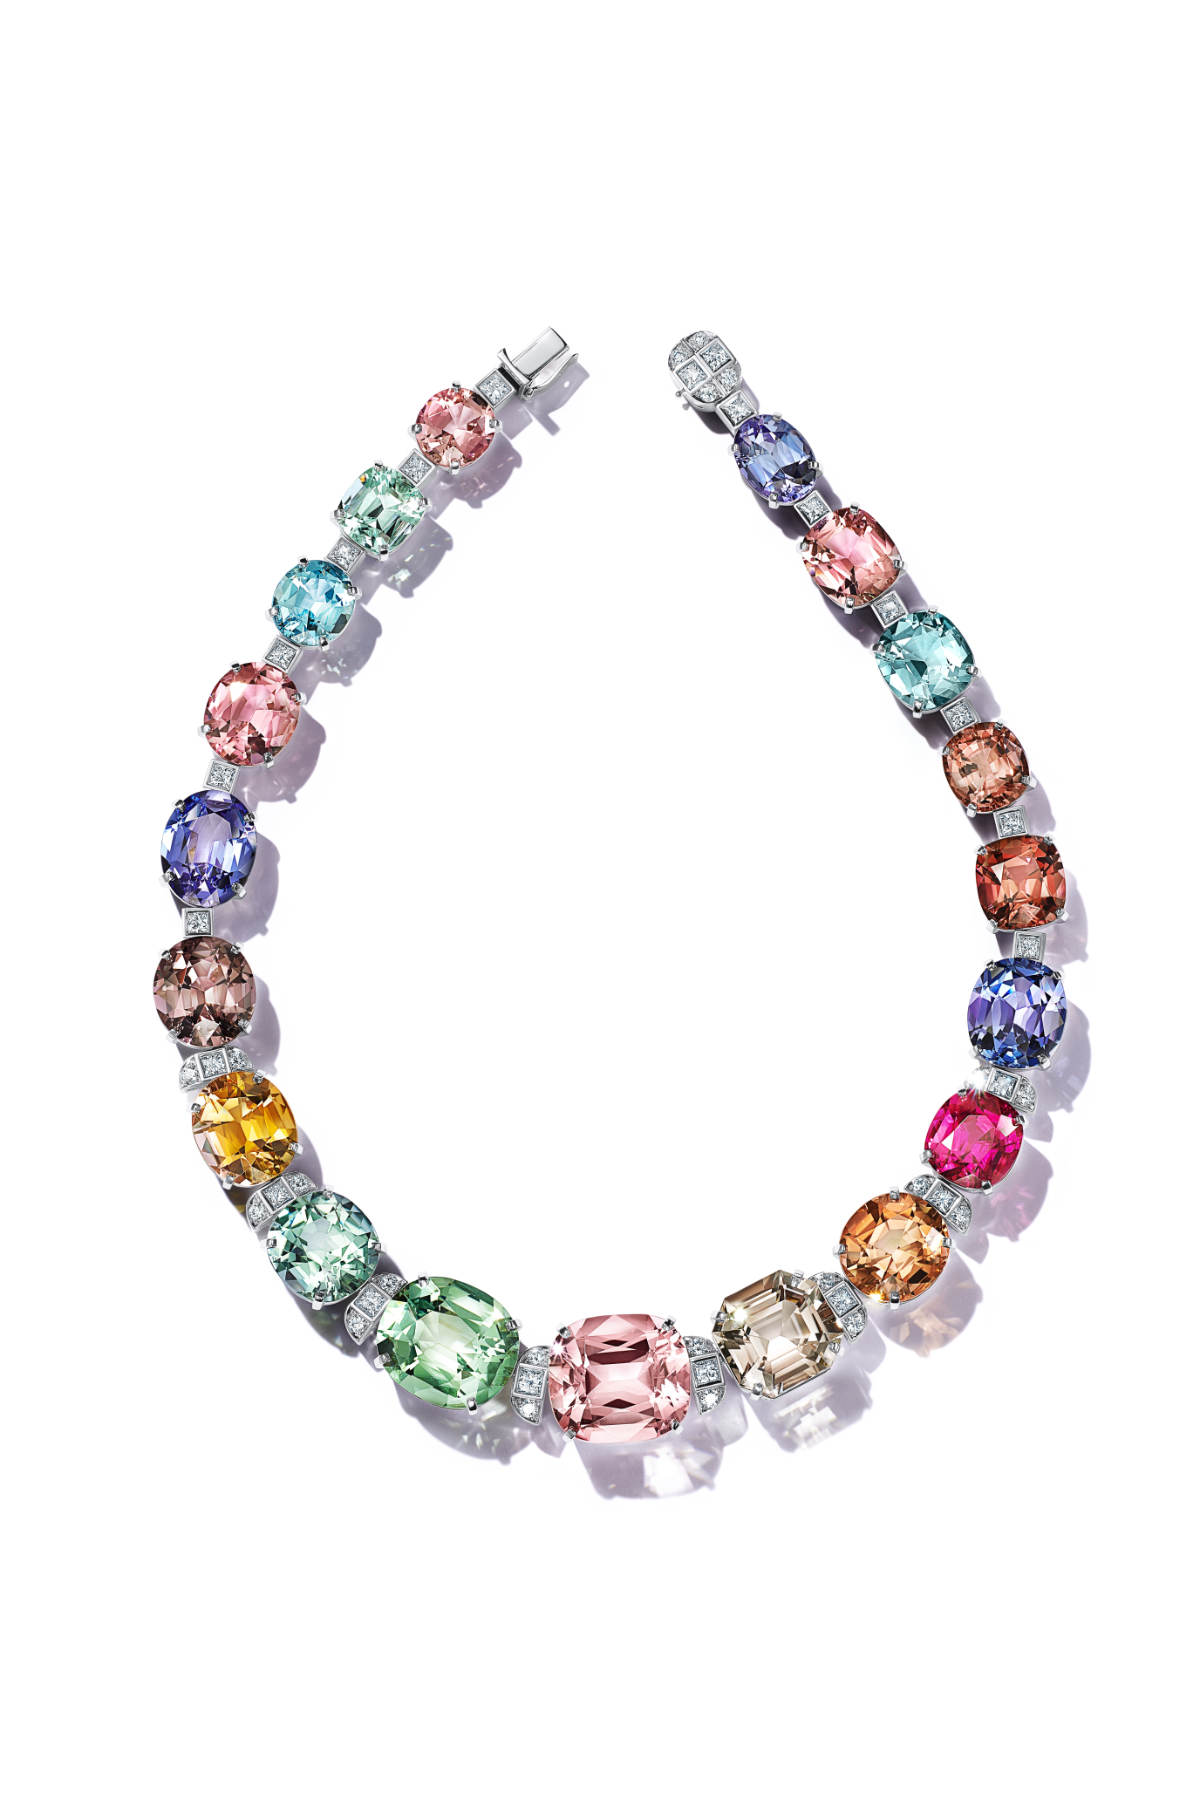 Tiffany & Co.'s Colors Of Nature Collection